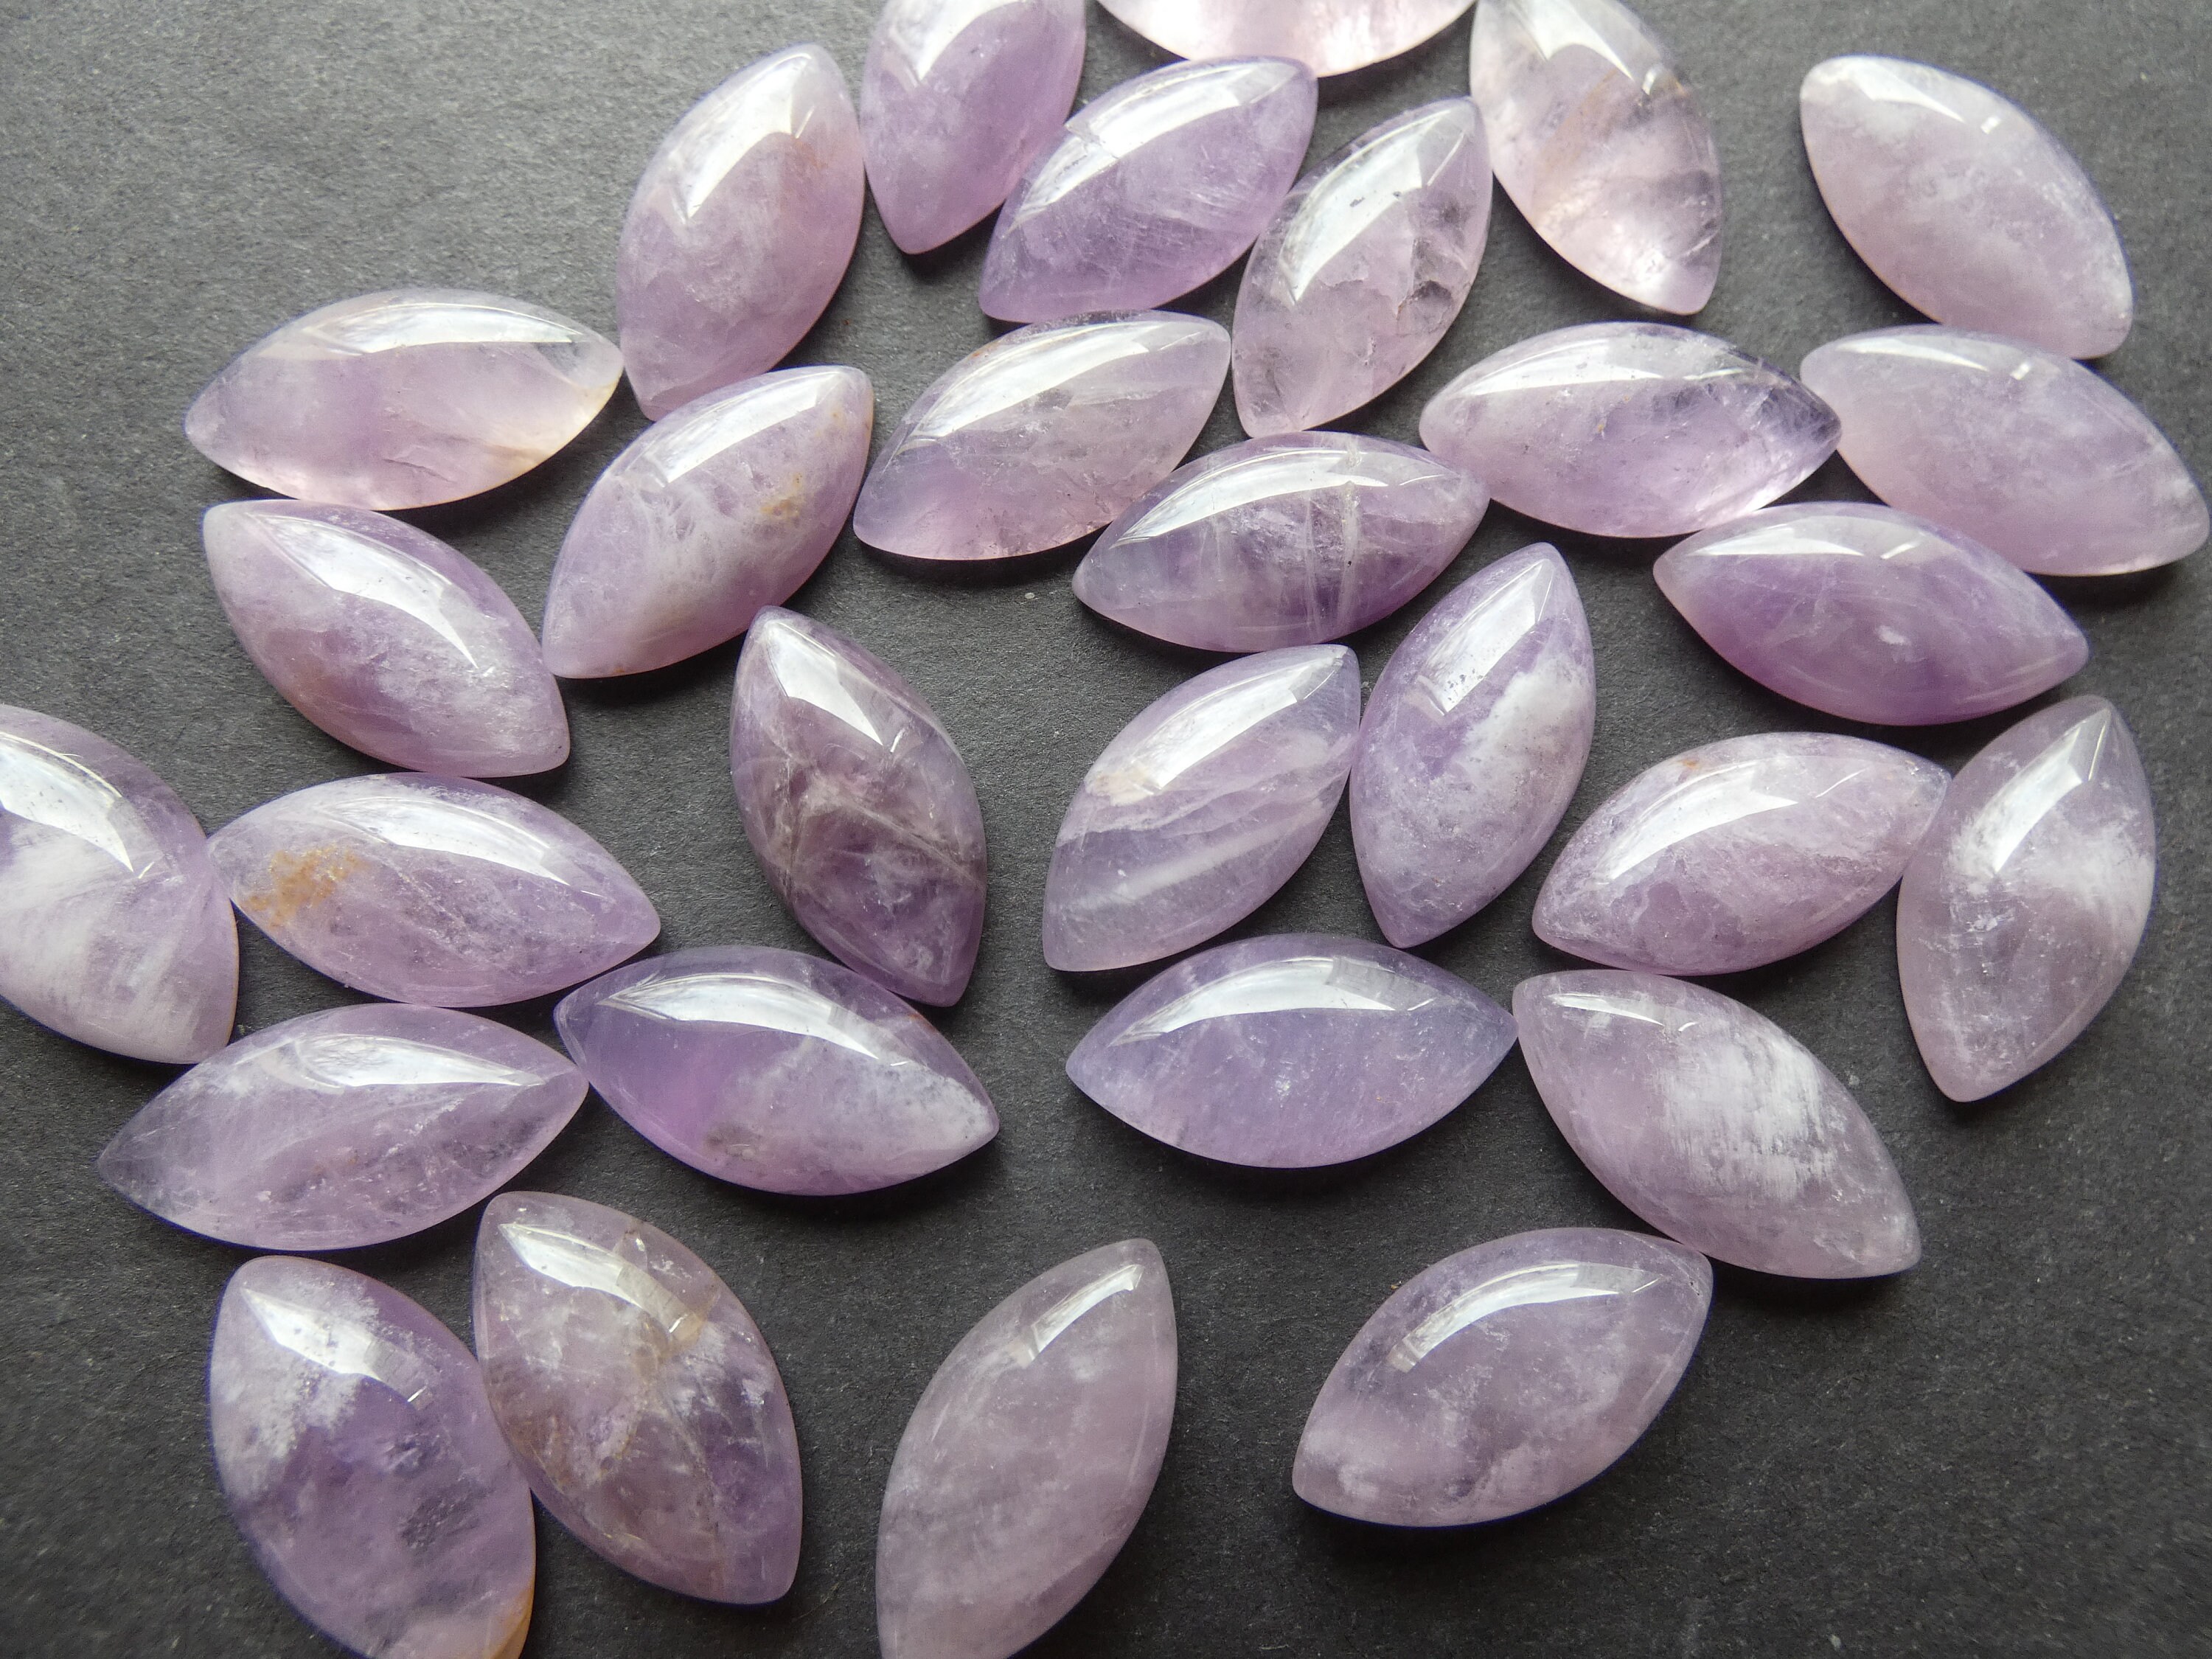 Details about   SALE! GREAT Lot Natural LAVENDER JADE 7X7 mm Round Cabochon Loose Gemstone 